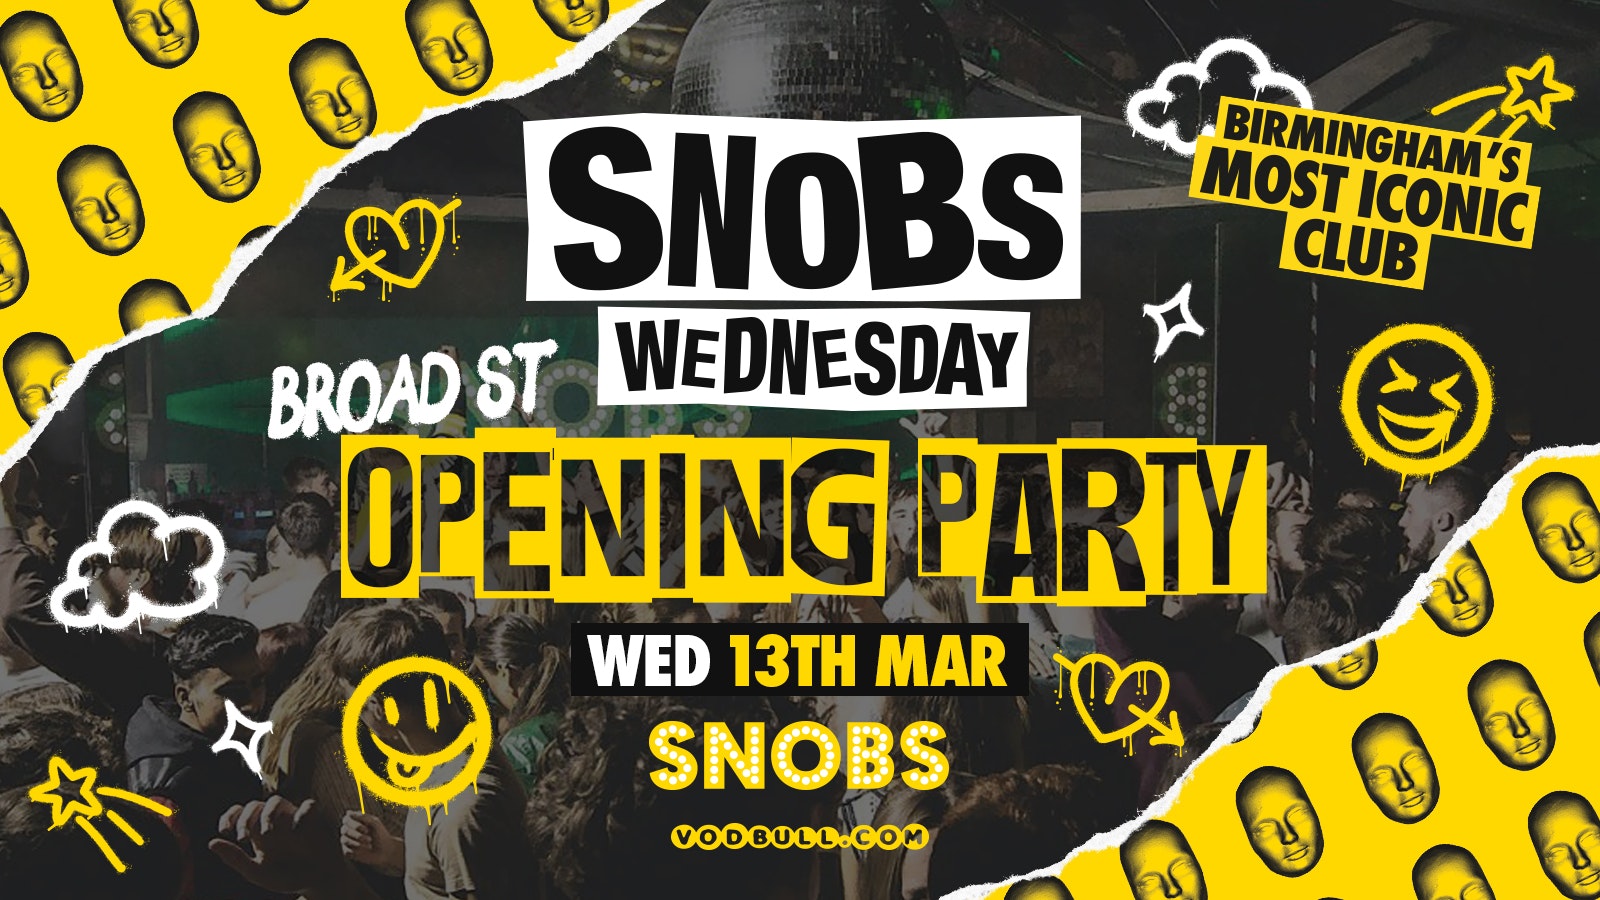 Snobs Wednesday ⭐️ OPENING PARTY!! ⭐️🔥ON SALE NOW! 🔥13th Mar